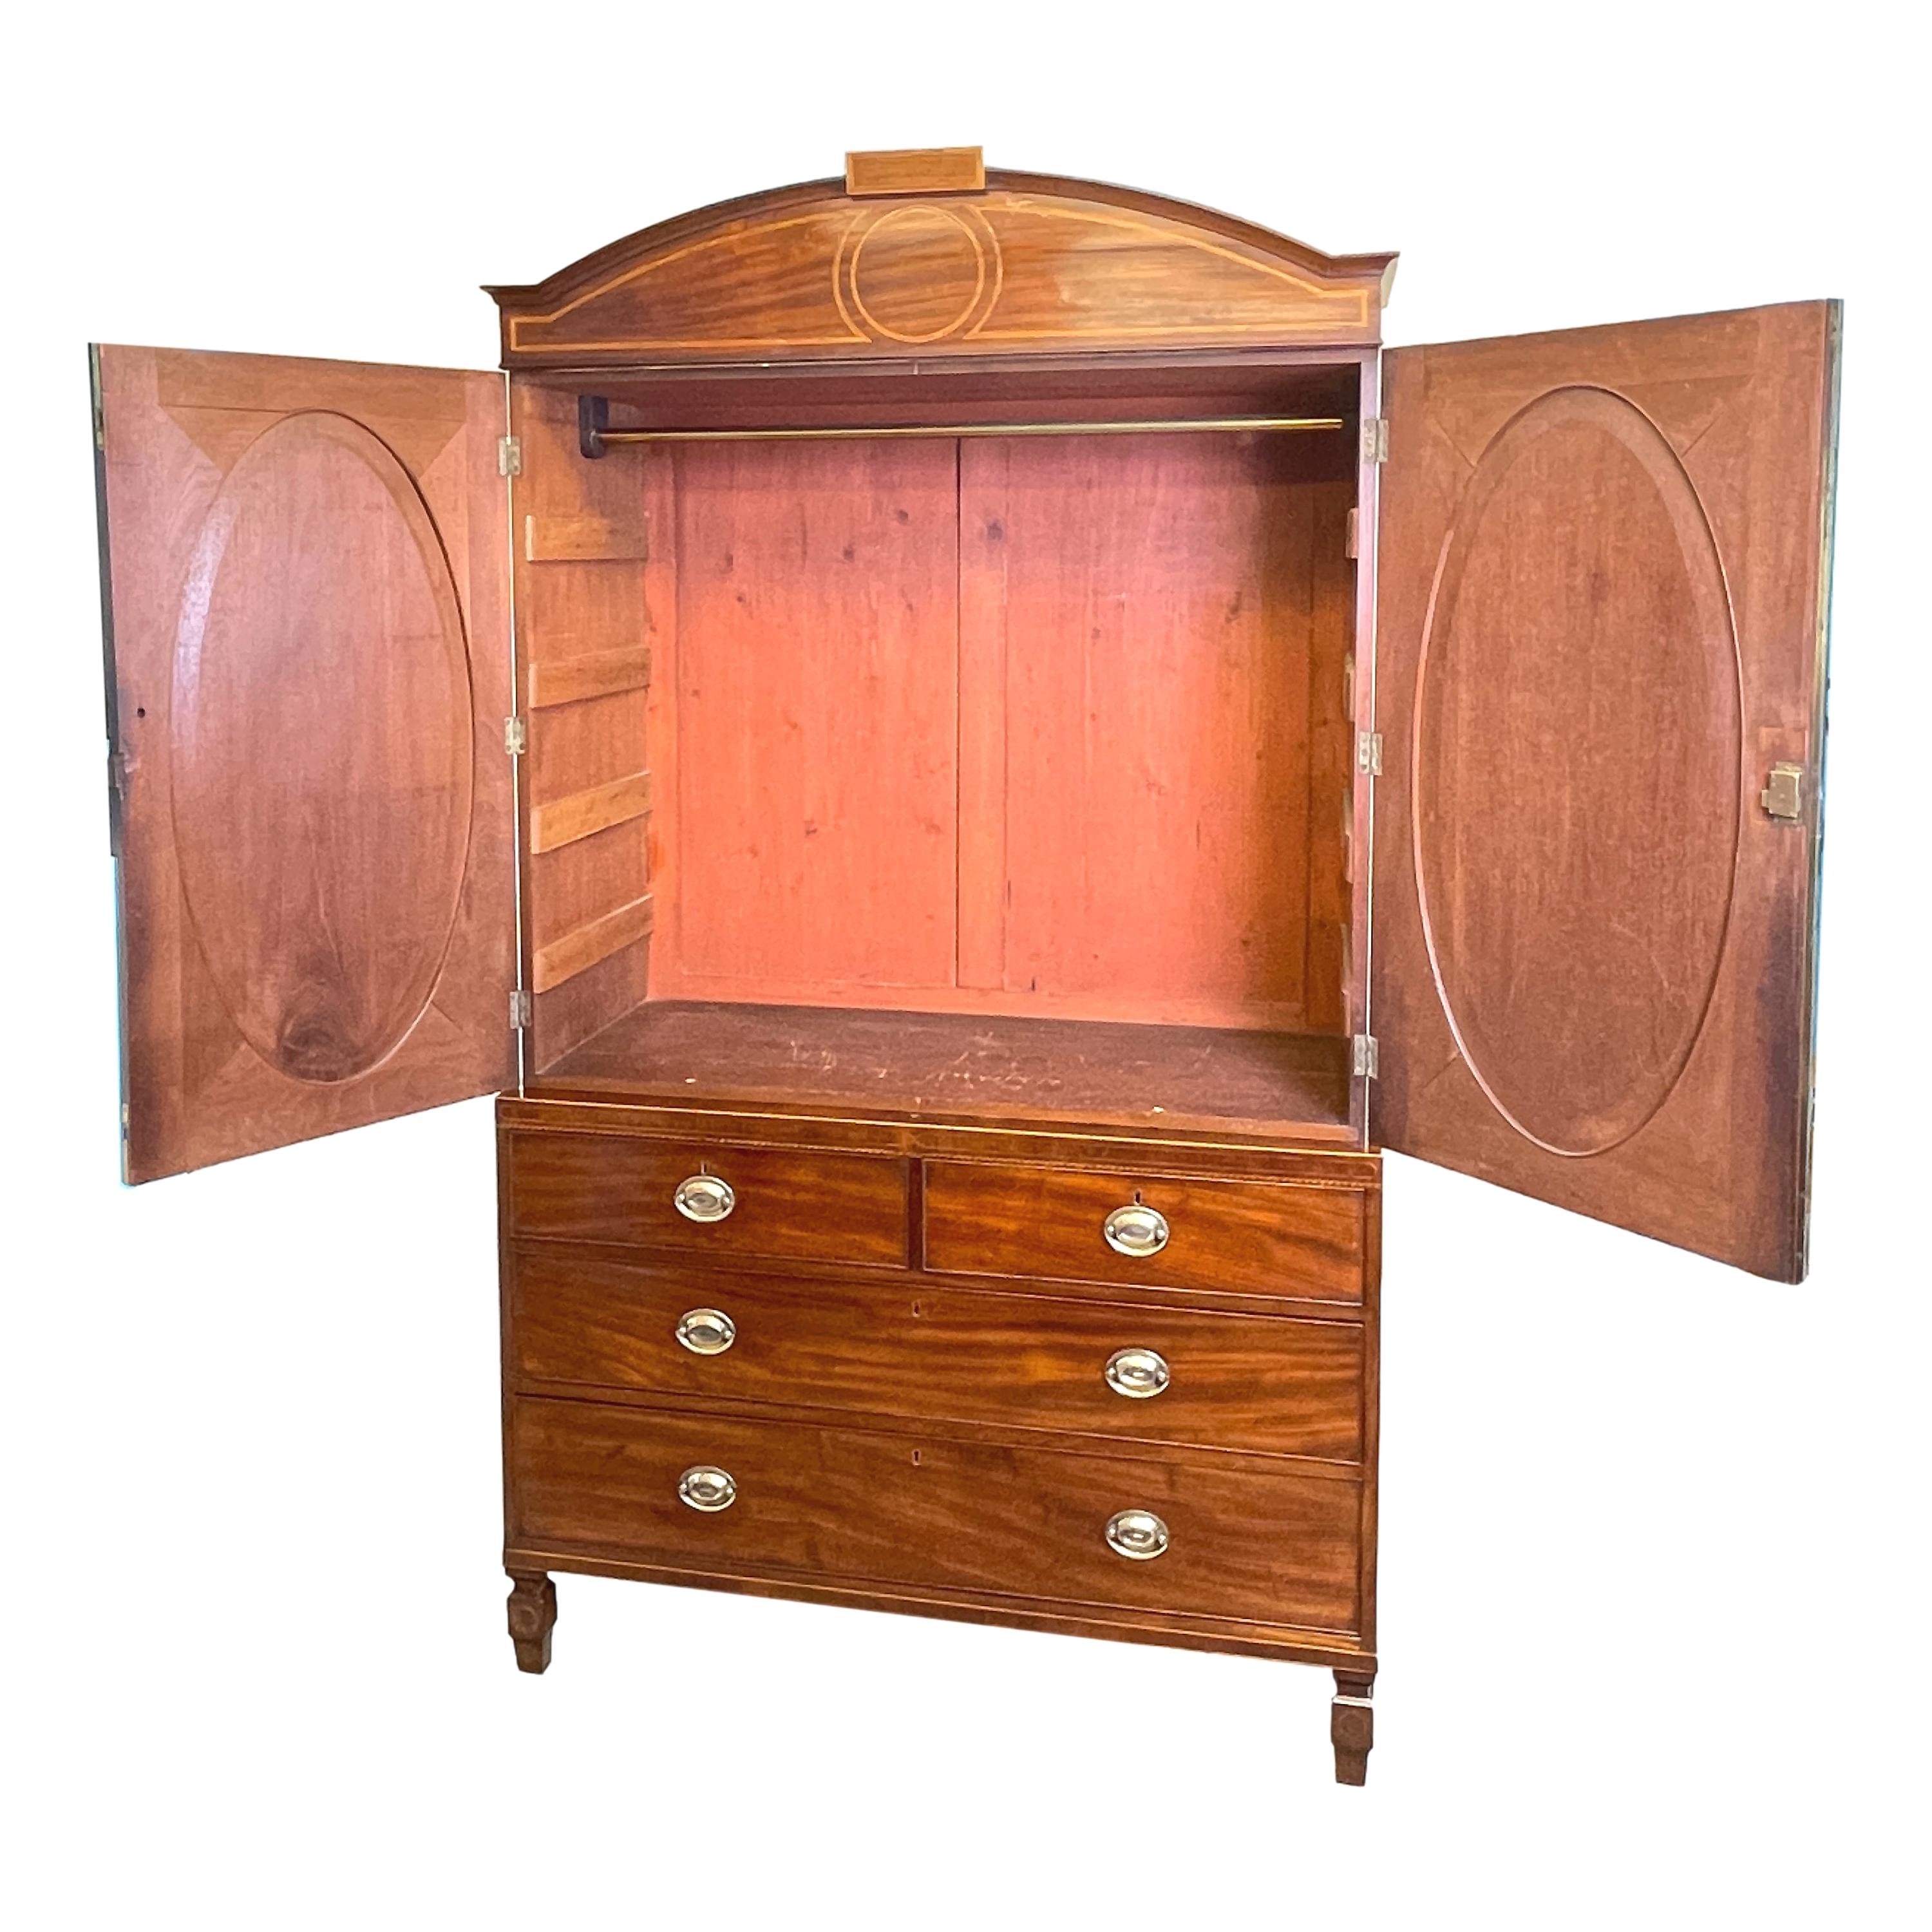 A very fine quality George III period mahogany linen
press having attractive arched cornice over superbly
figured & crossbanded oval paneled doors enclosing
hanging rail above two short and two long drawers
with replacement brass handles raised